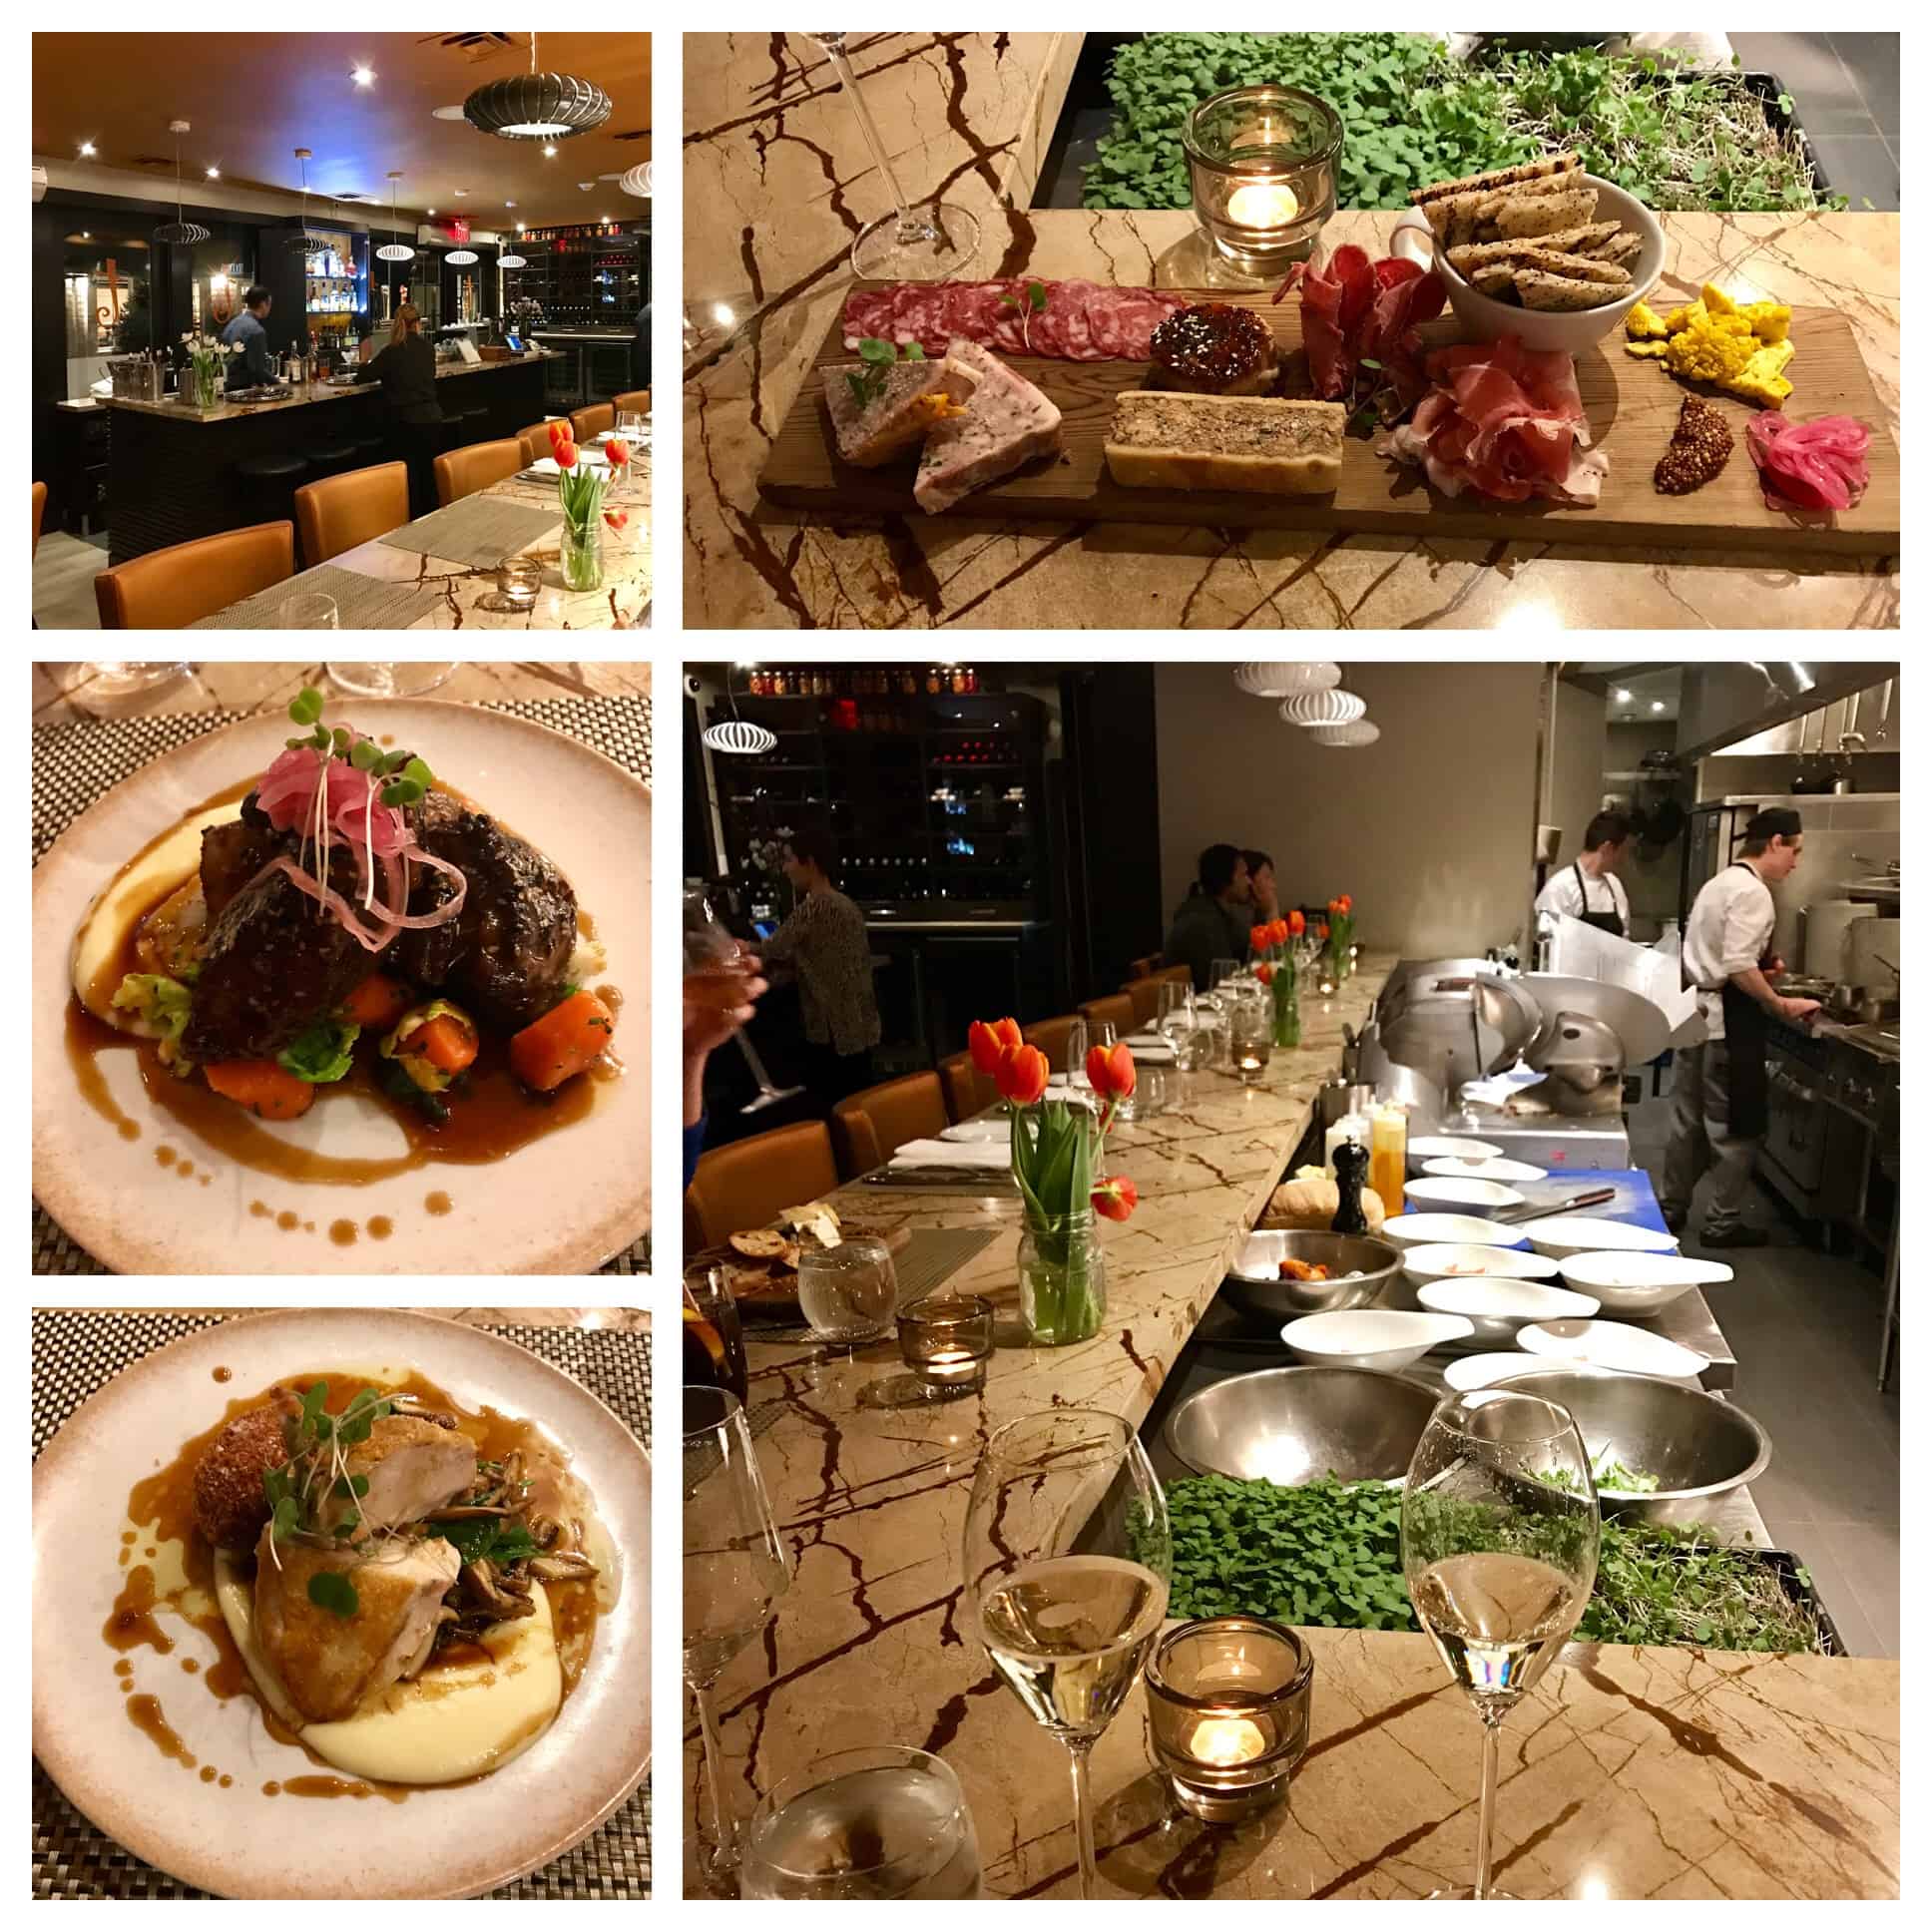 Collage of images from Treadwell Restaurant